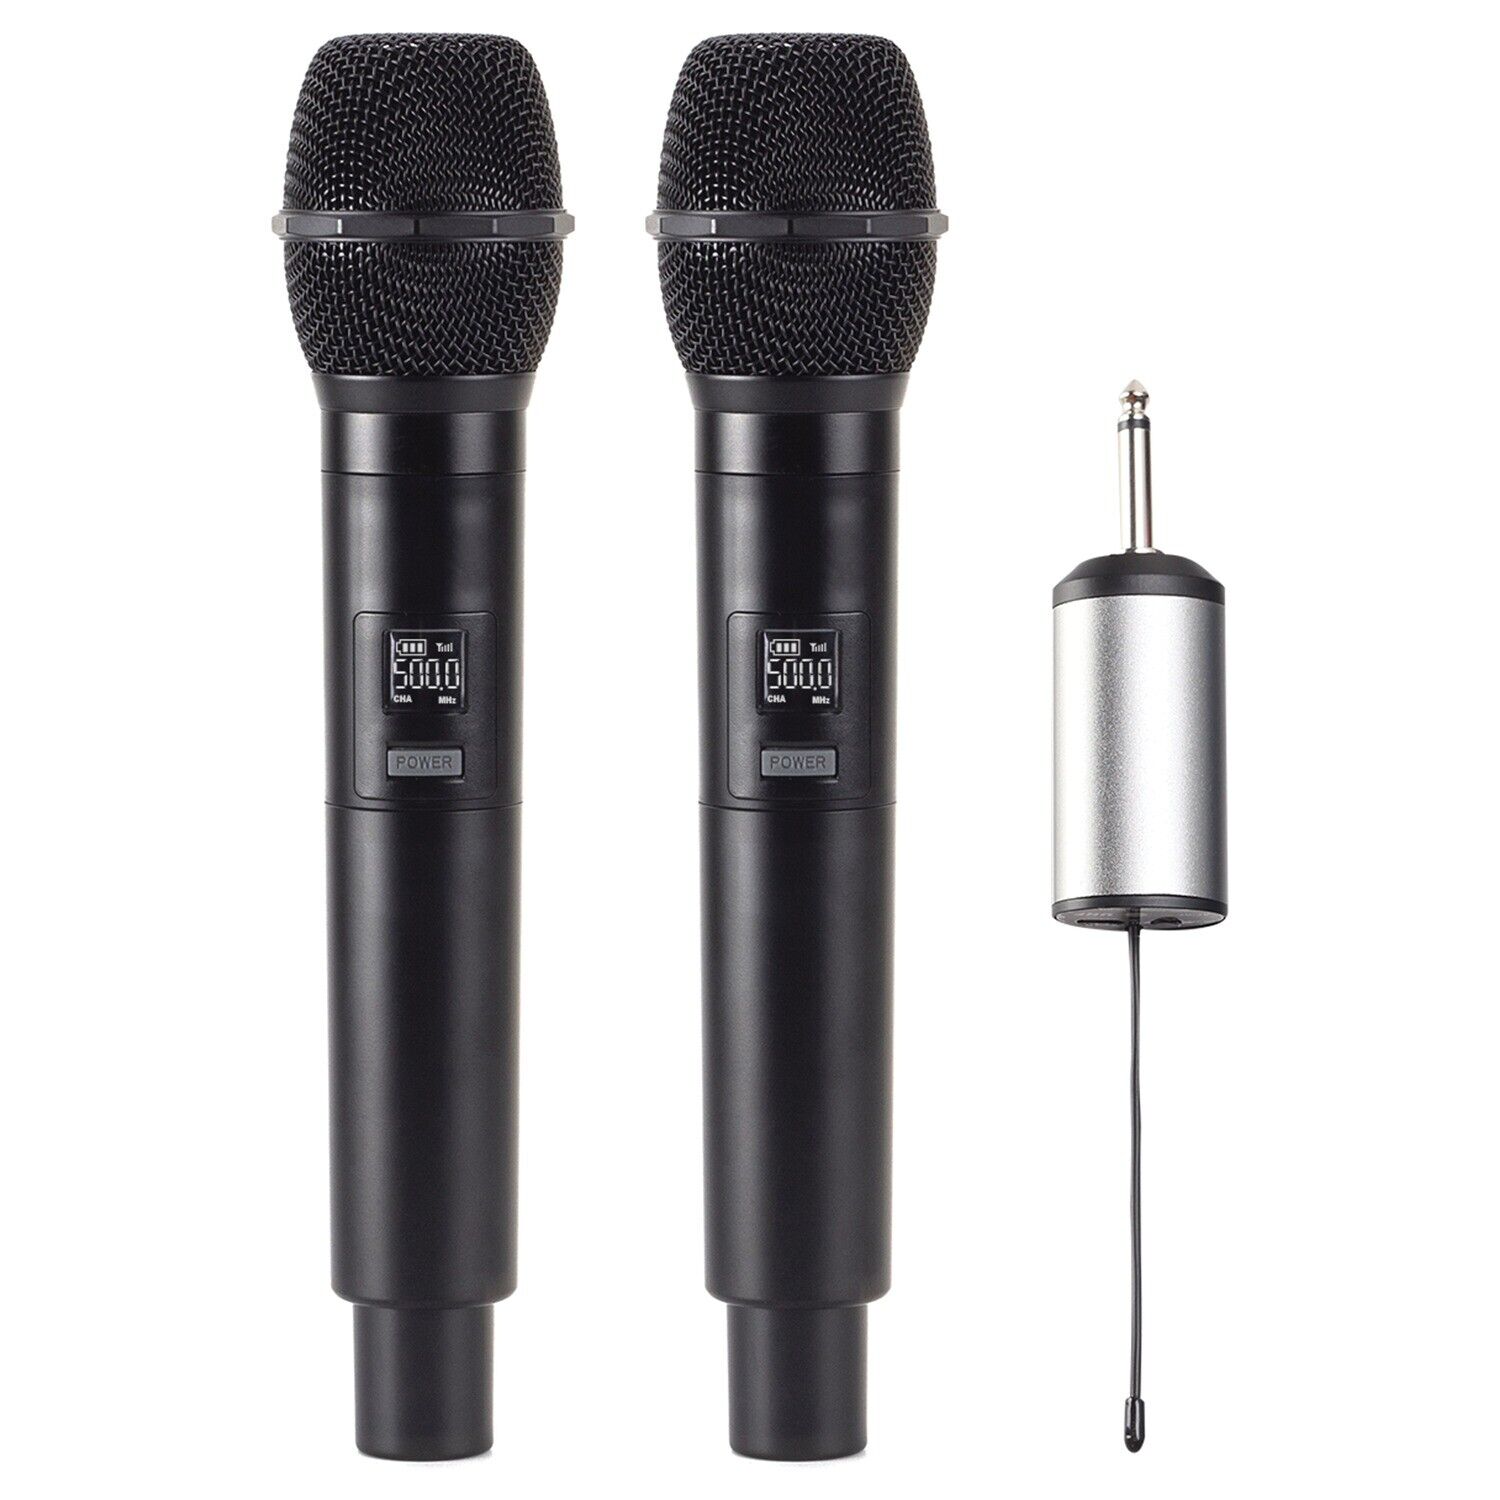 Blackmore Pro Audio Bmp-12 Bmp-12 Dual Wireless Uhf Microphone System (black)